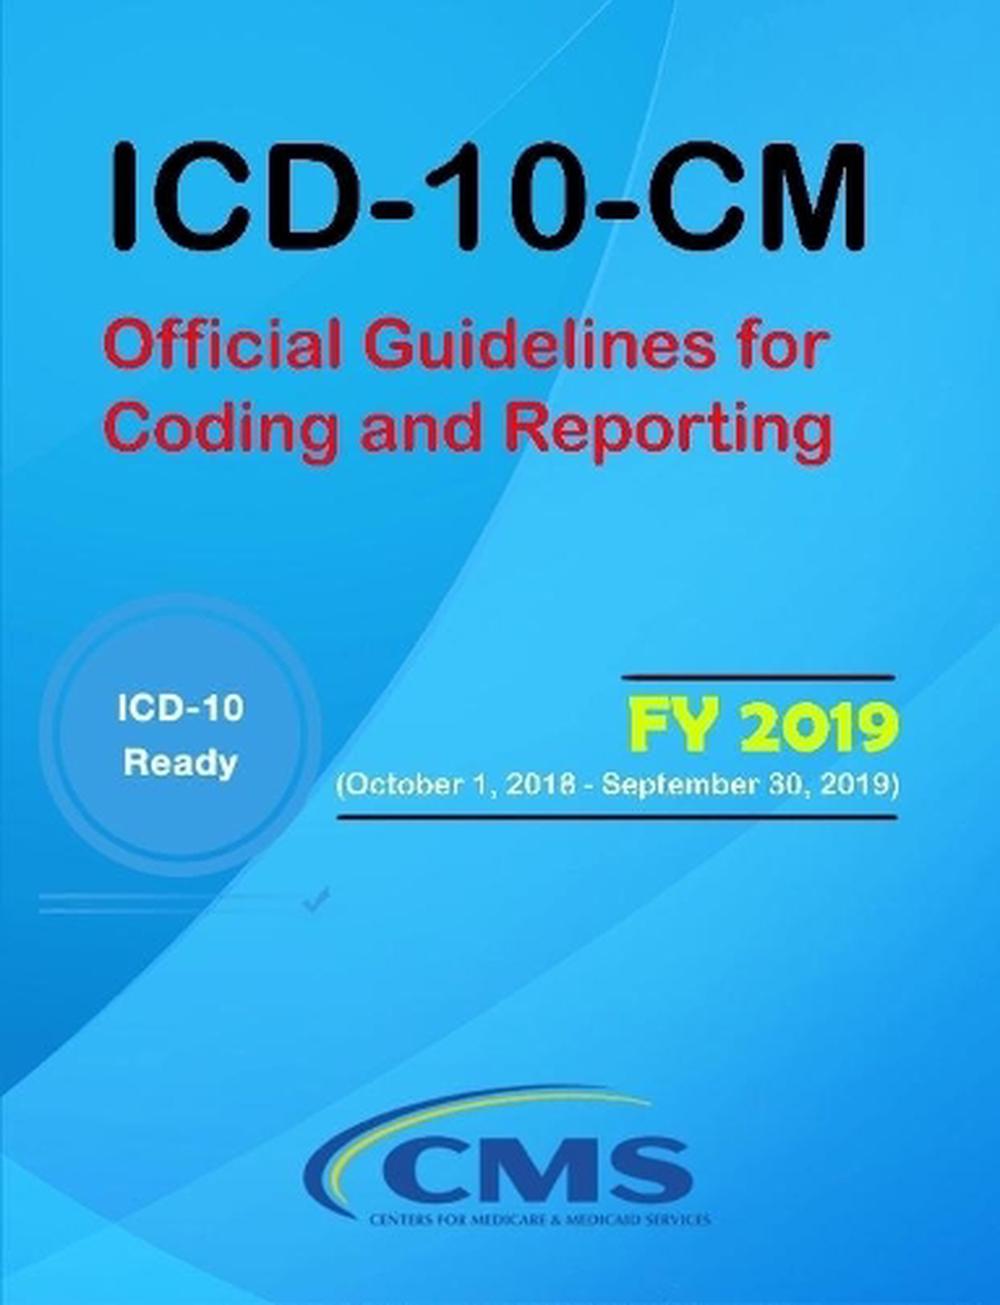 Icd10cm Official Guidelines for Coding and Reporting Fy 2019